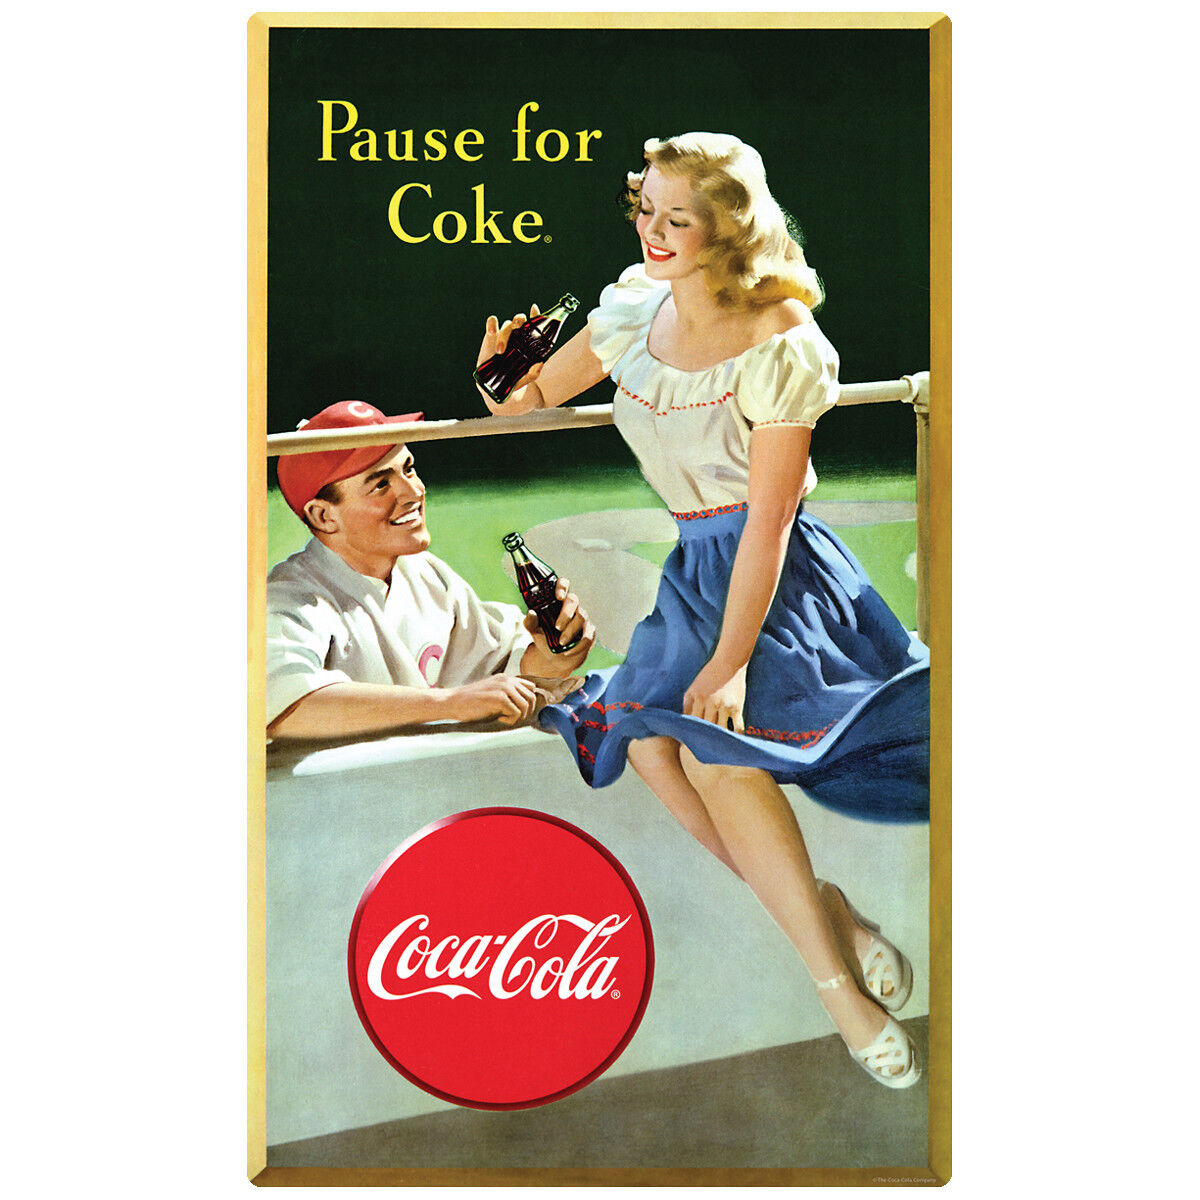 Coca-Cola Pause for Coke Baseball Wall Decal Officially Licensed Made In USA